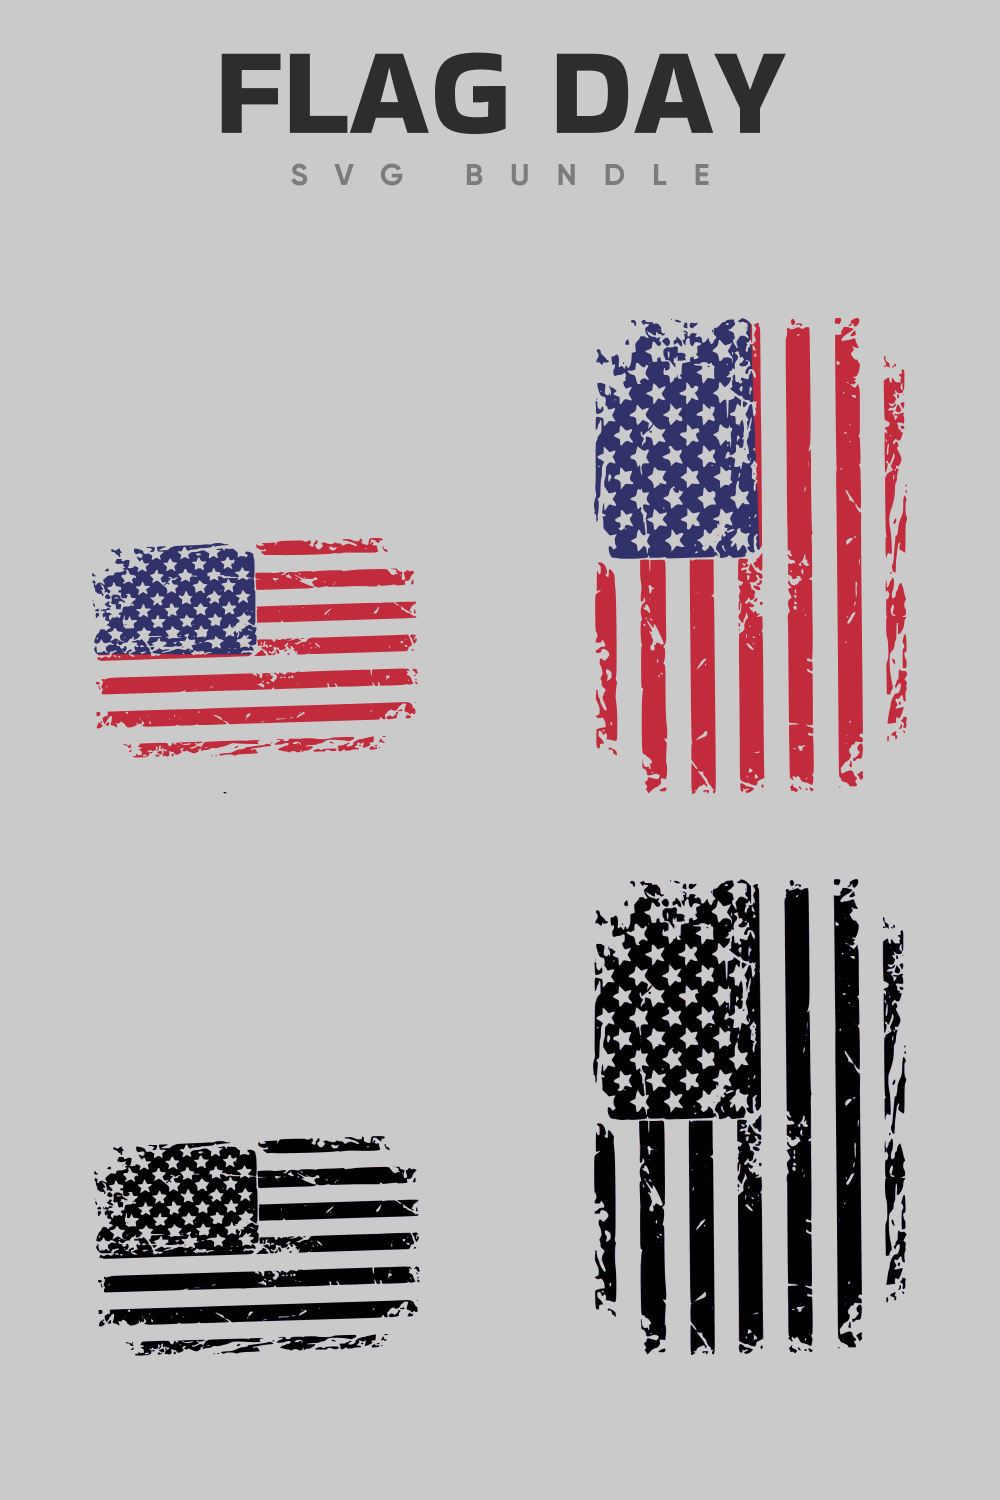 The American flag is placed vertically and horizontally.